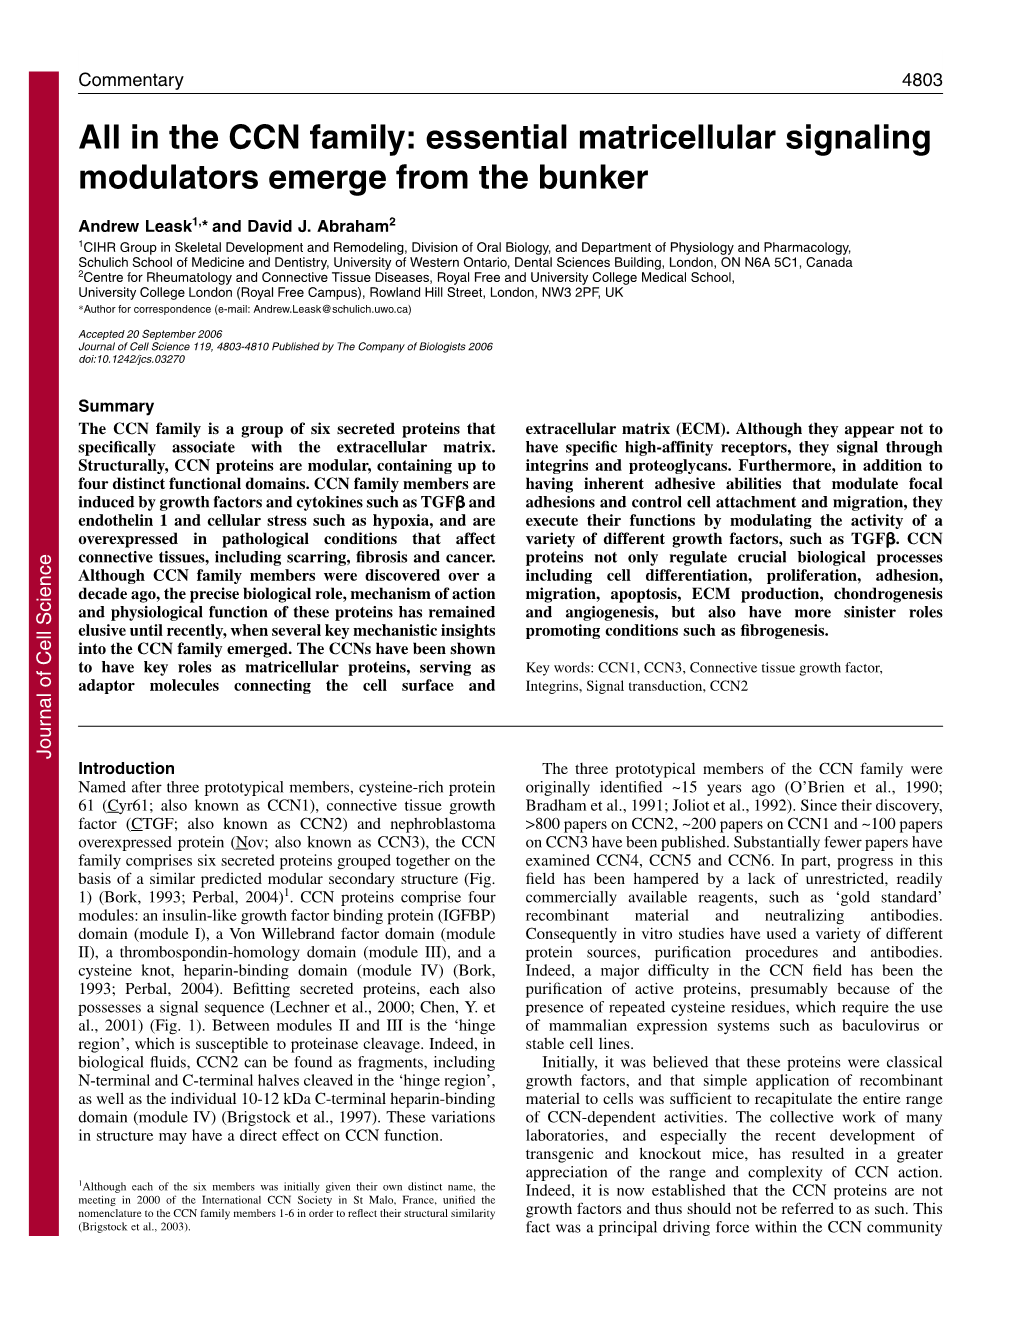 In the CCN Family: Essential Matricellular Signaling Modulators Emerge from the Bunker